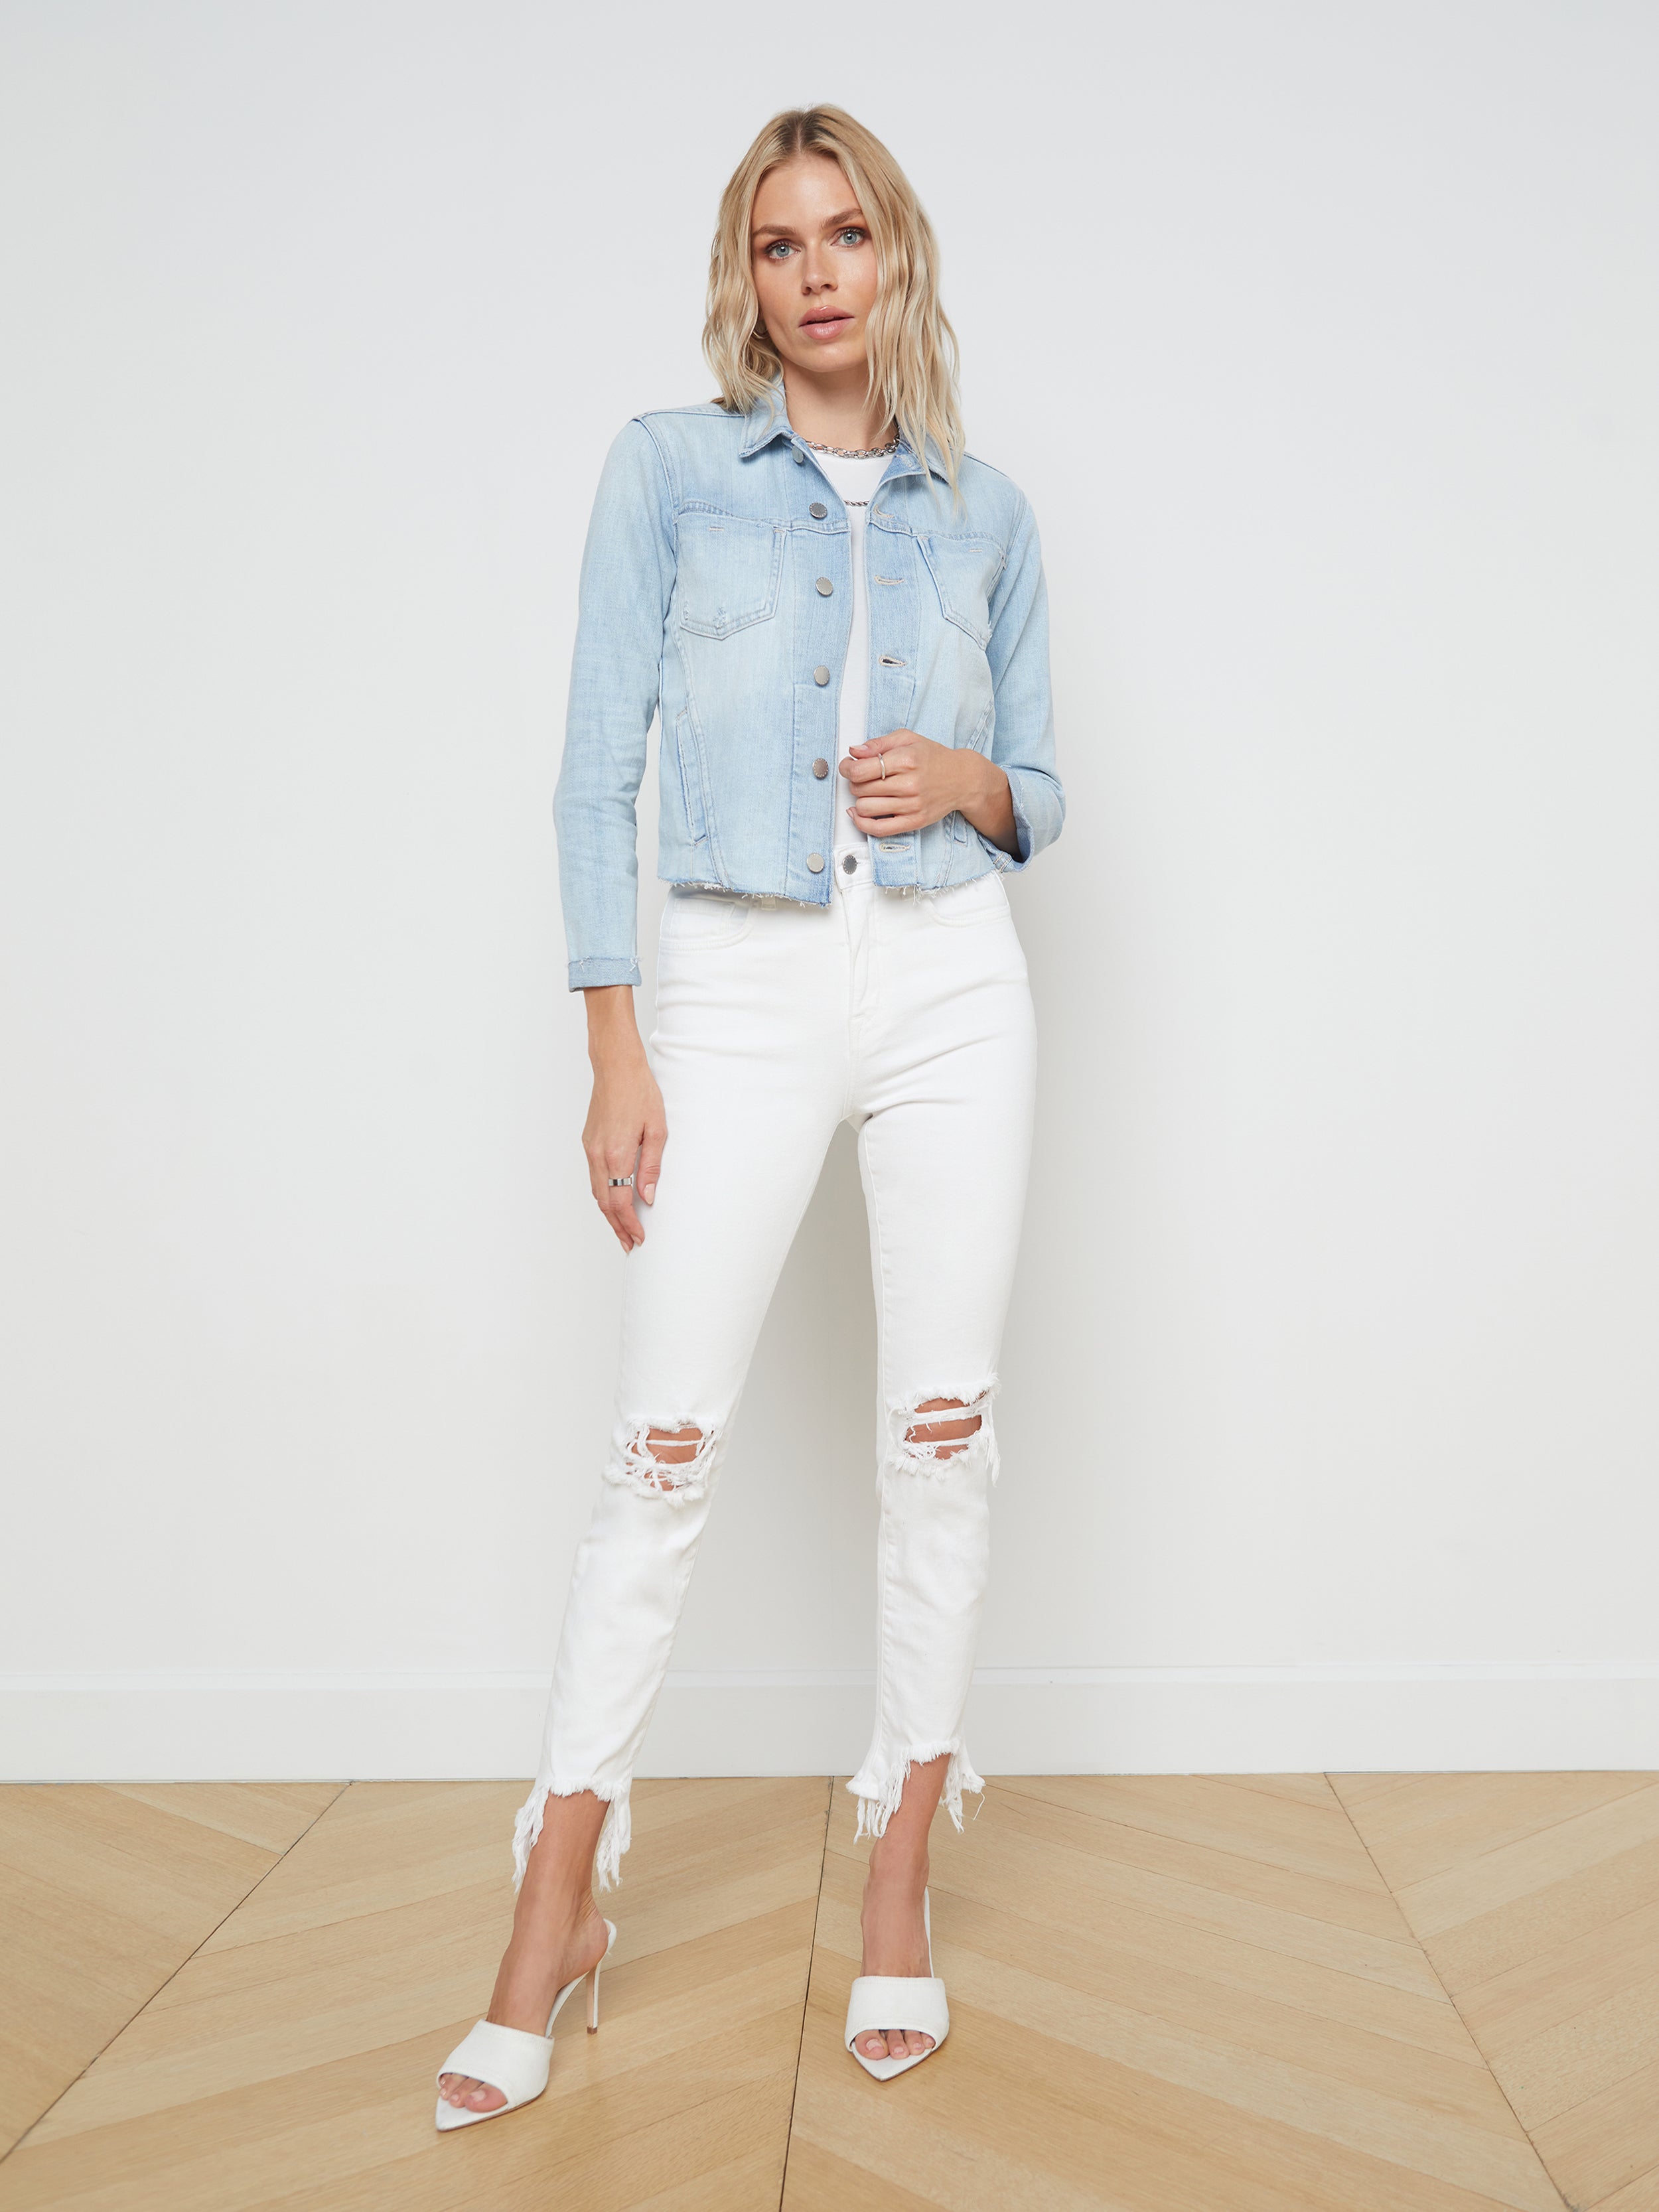 Stylish Outfit Ideas for White Jeans